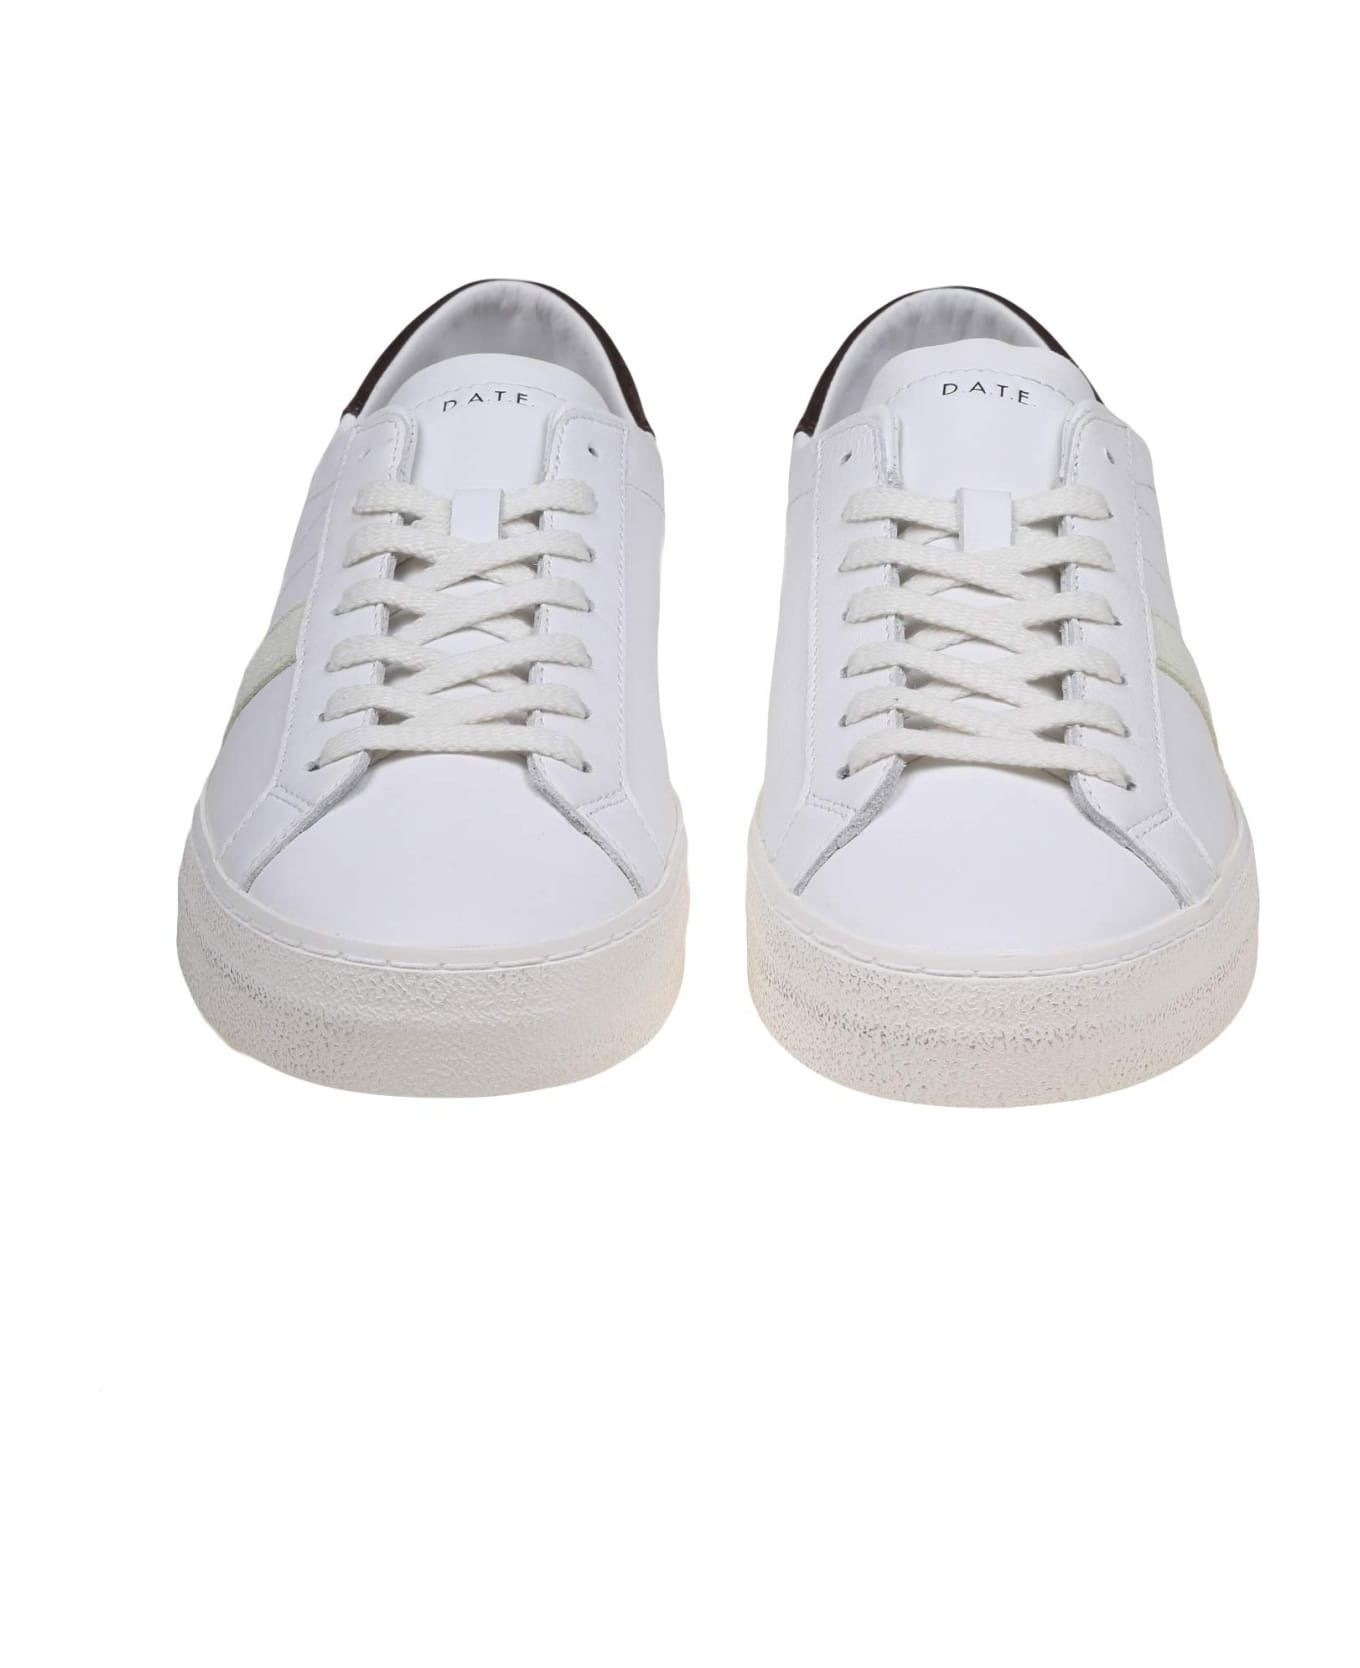 D.A.T.E. Hill Low Vintage Sneakers In White/brown Leather - WHITE/MORO スニーカー